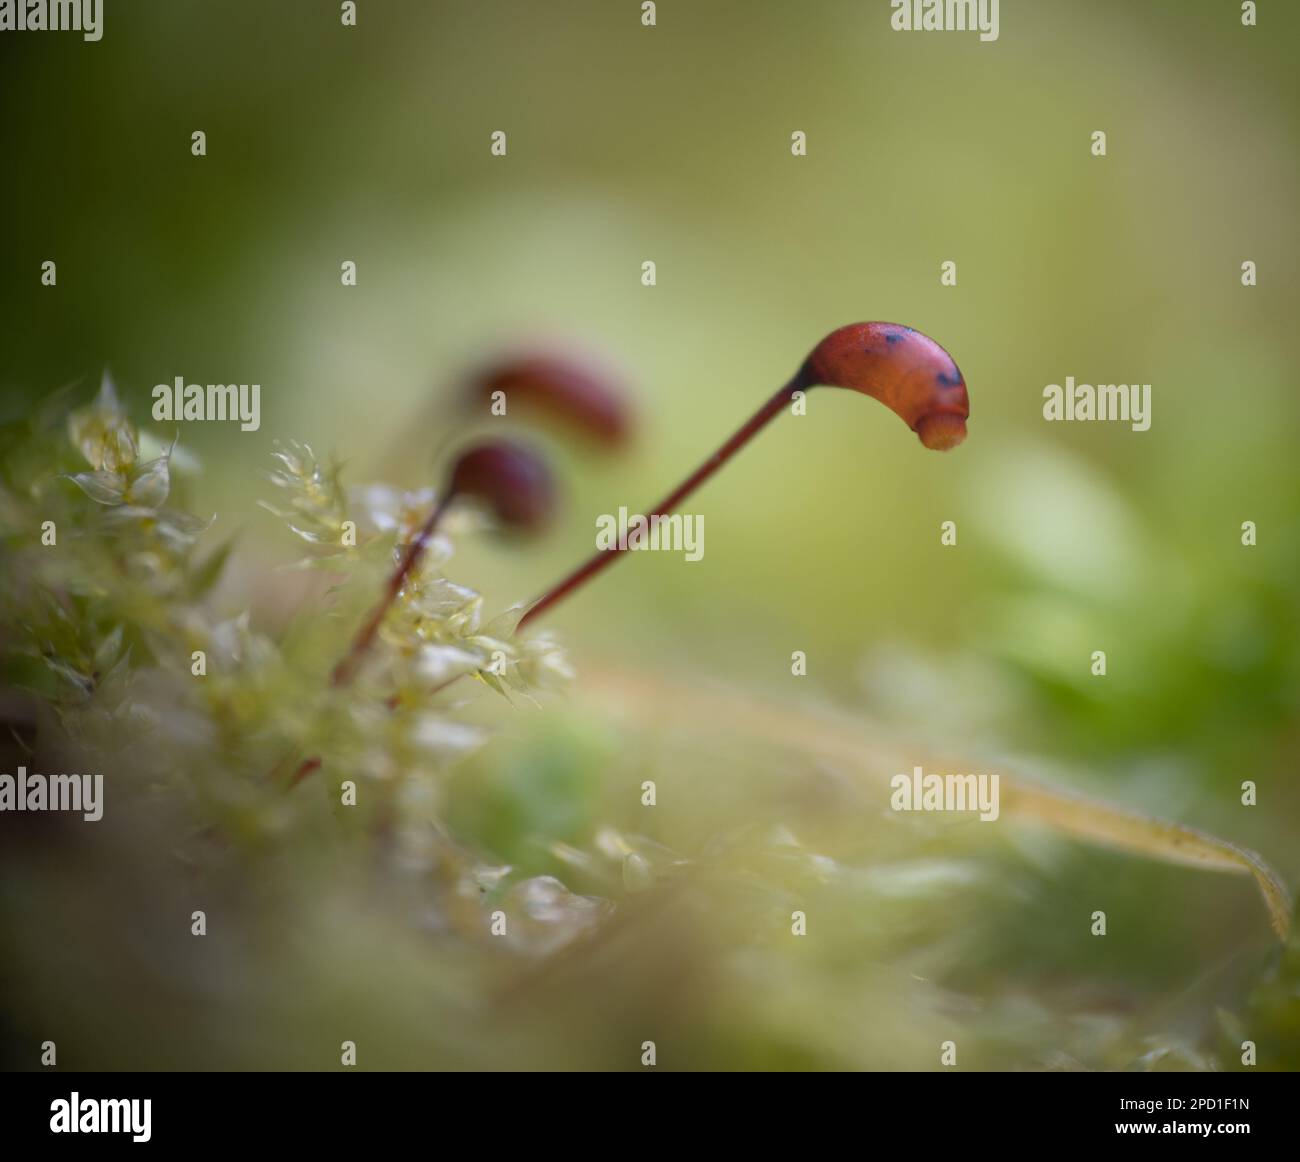 Extreme close-up photo of a moss. Shallow depth of field. Stock Photo